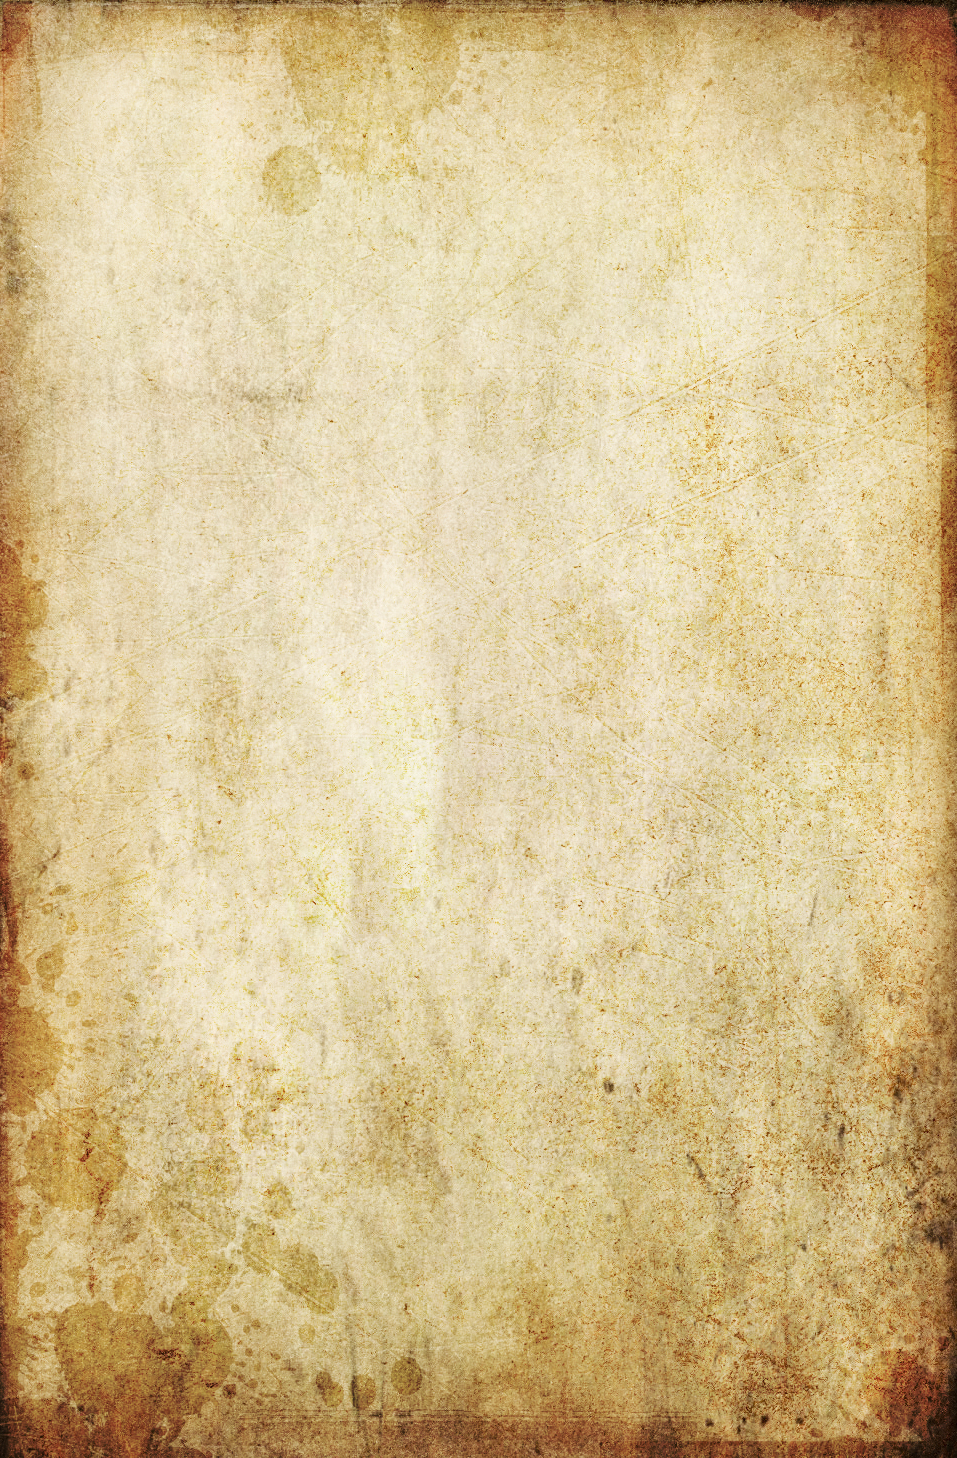 old paper texture background, free image